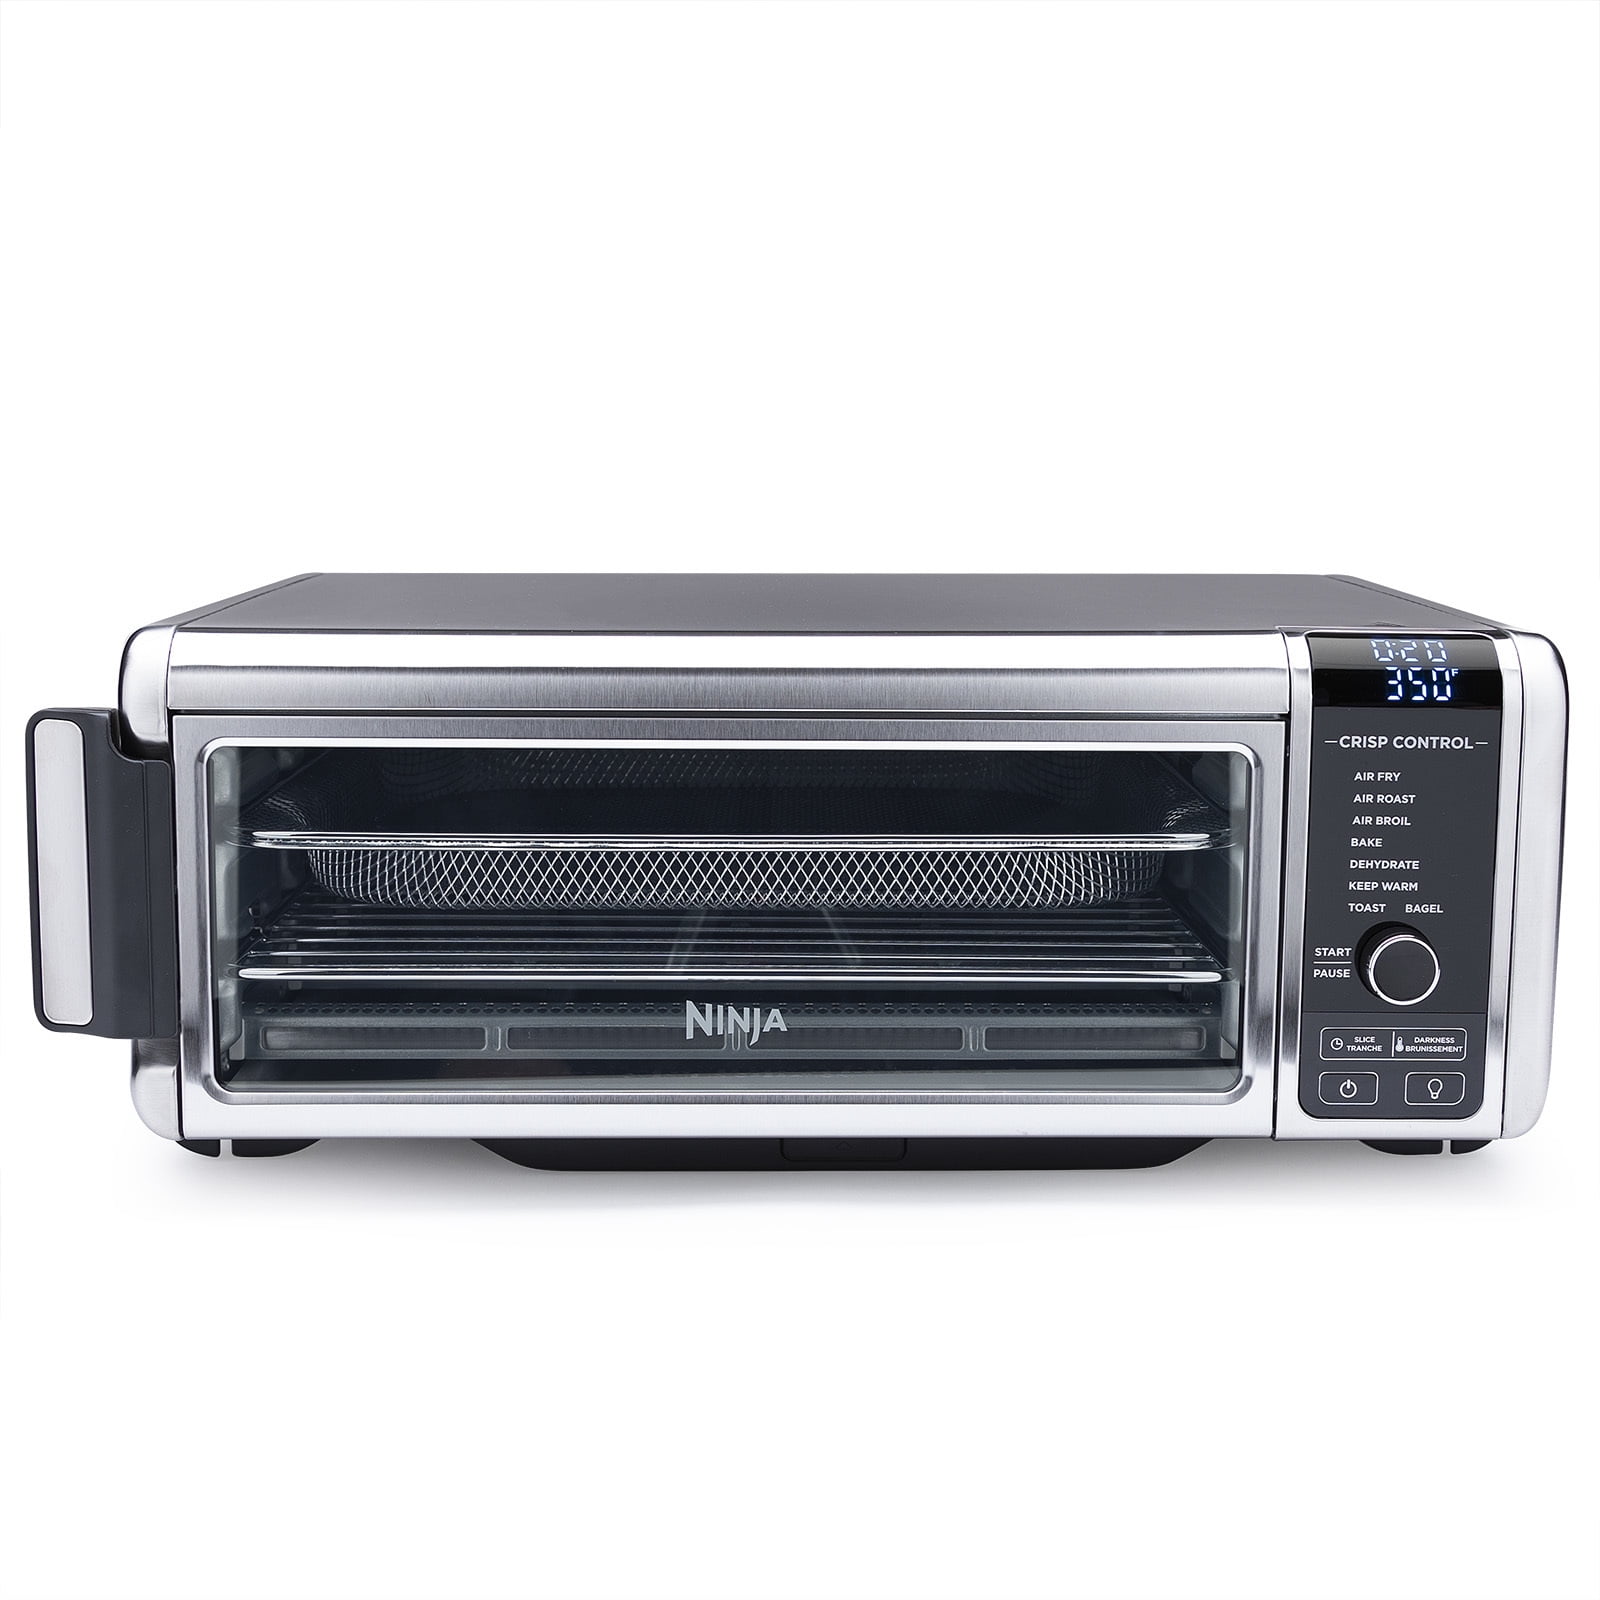 NINJA SP101 Stainless Steel Foodi Digital Air Fry Oven, Convection Oven,  Toaster, Air Fryer, Flip-Away for Storage